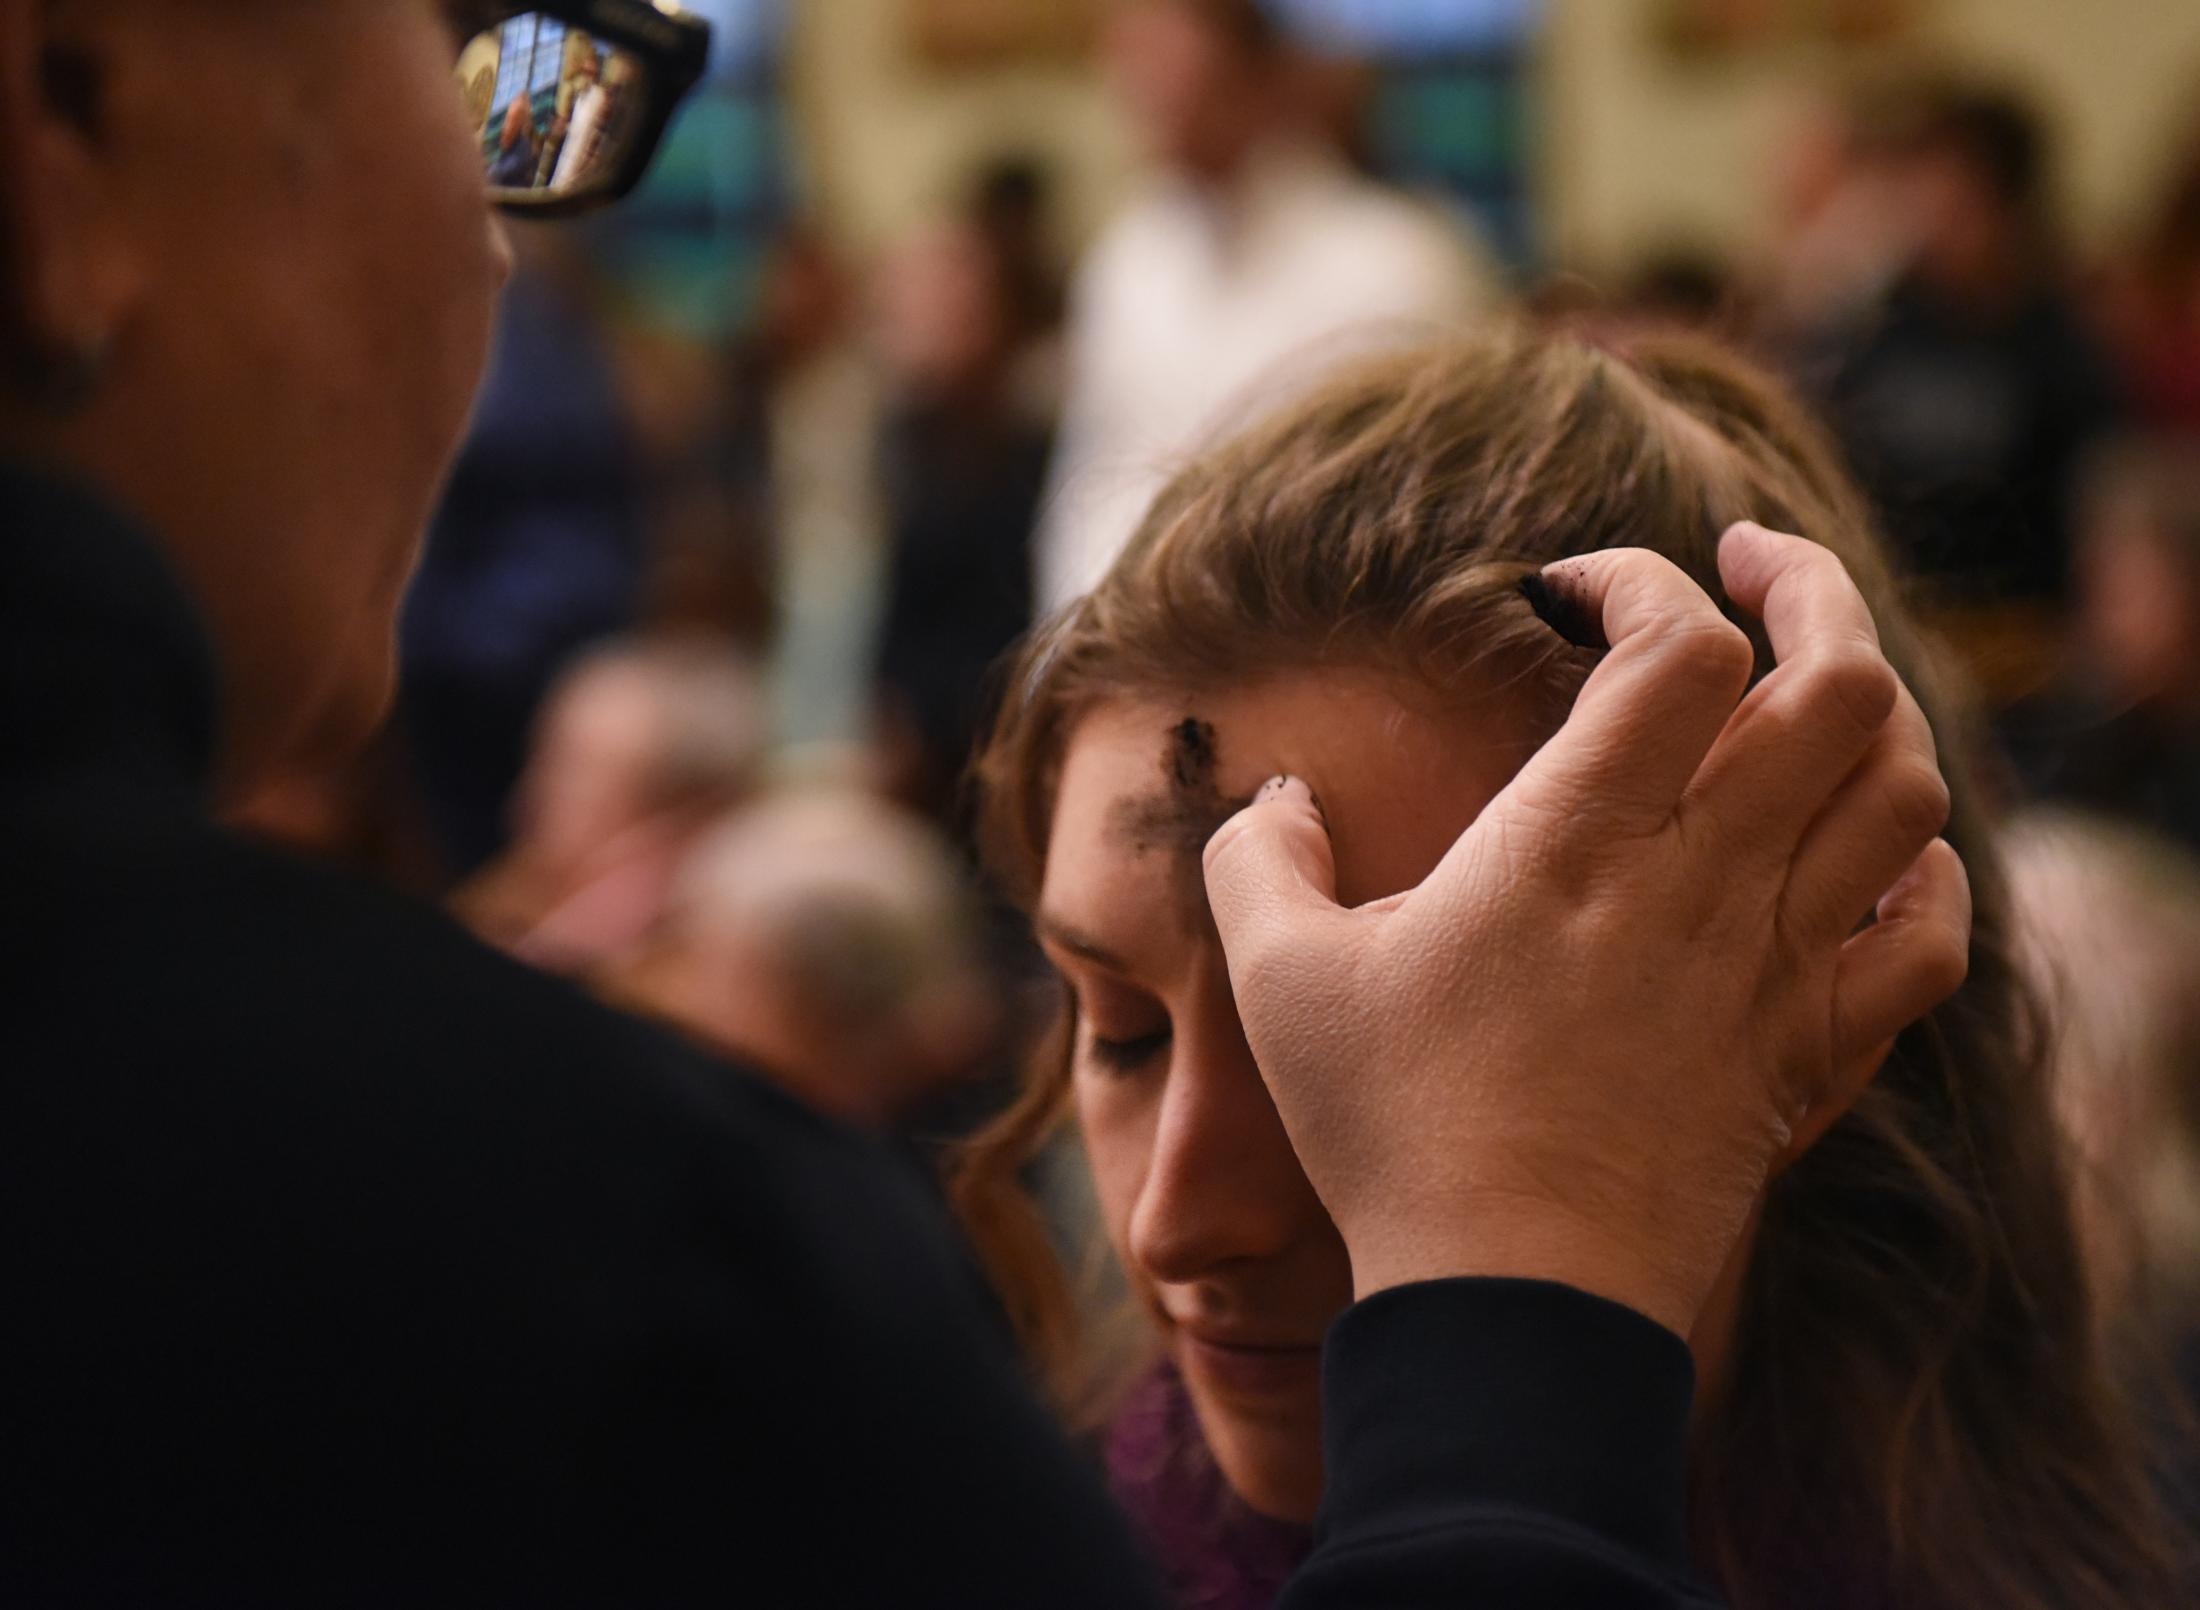 Emily Million receives a cross of ash during evening mass at Sacred Heart Catholic Church in Columbia. Traditionally, members of the Catholic Church receive crosses made of ash on their forehead, symbolizing repentance.